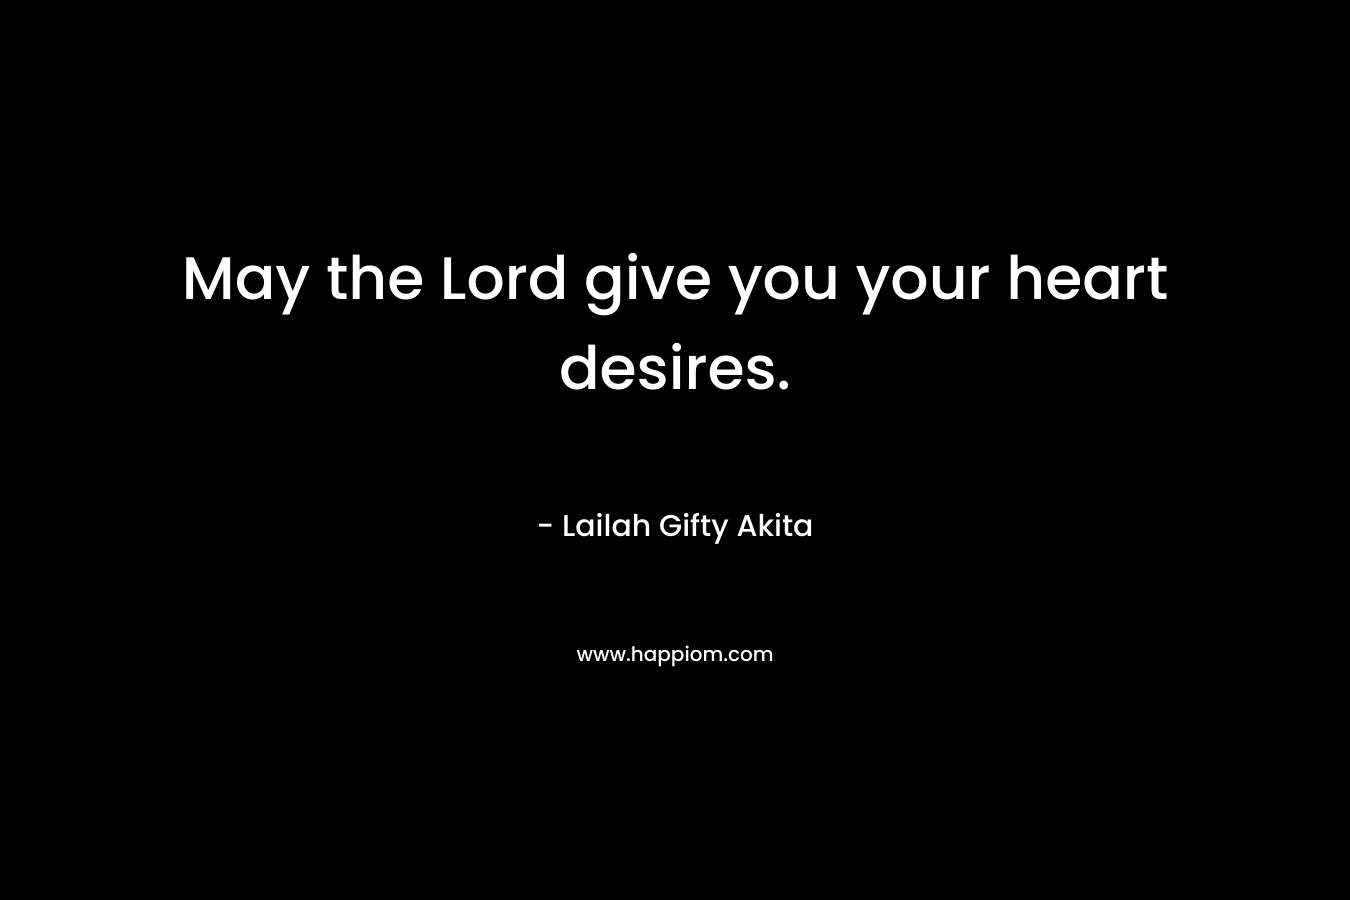 May the Lord give you your heart desires.